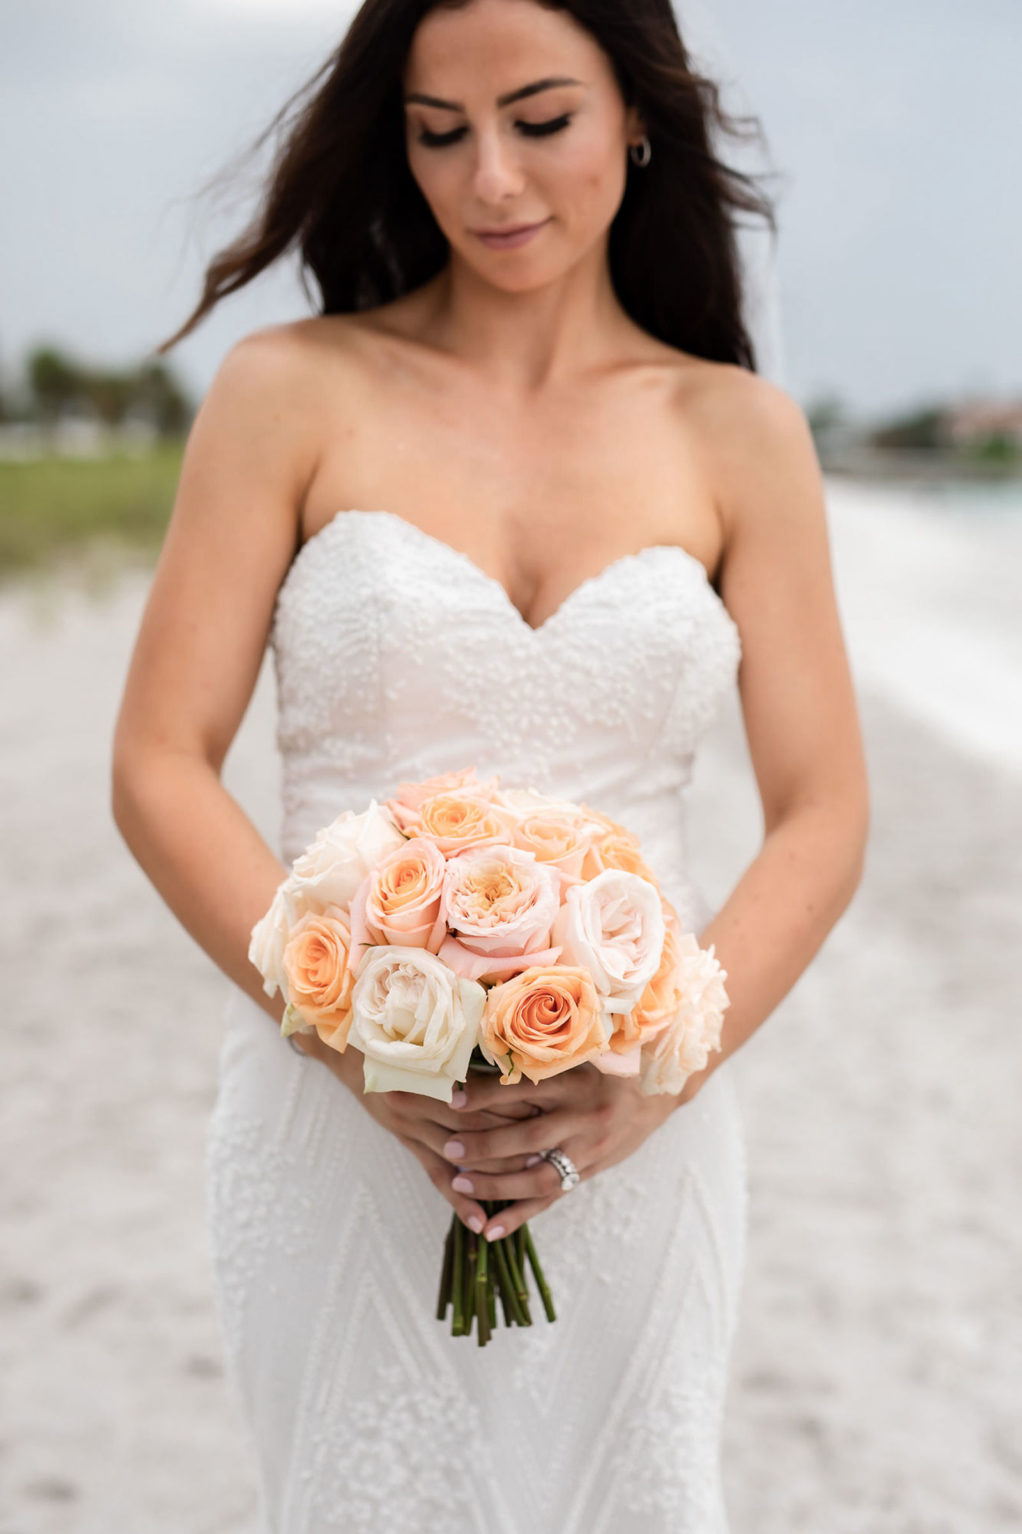 Outdoor Bridal Portrait | Strapless Sheath Embroidered Wedding Dress Bridal Gown by Designer Tara Keilly | Simple Round Bridal Wedding Bouquet with Peach Pink and Coral Roses